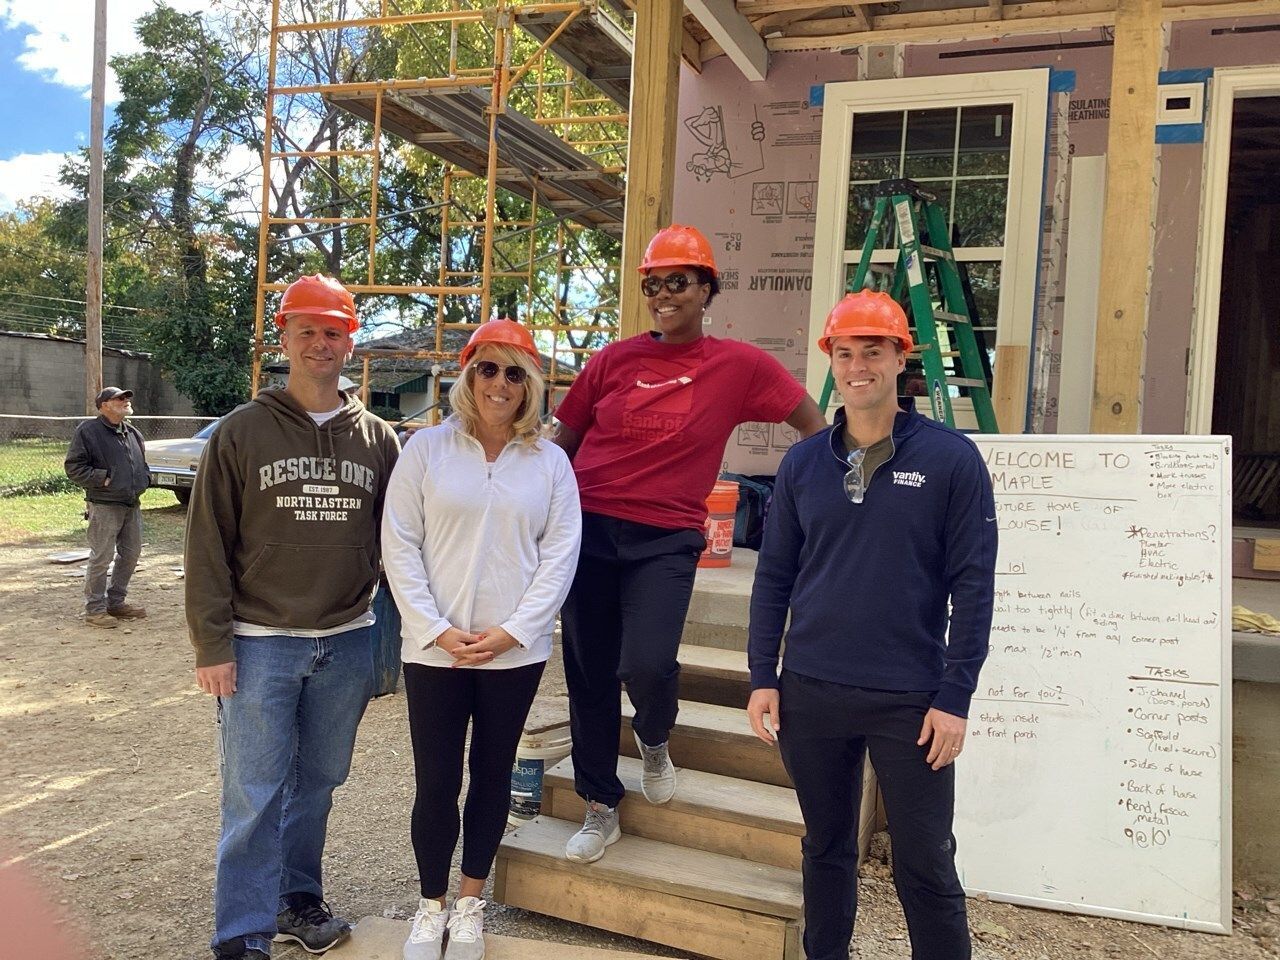 The Bank of America Charitable Foundation recently awarded Habitat for Humanity of Greater Cincinnati (HFHGC) a $45,000 grant as part of its broader initiative to support Ohio’s long-term sustainability